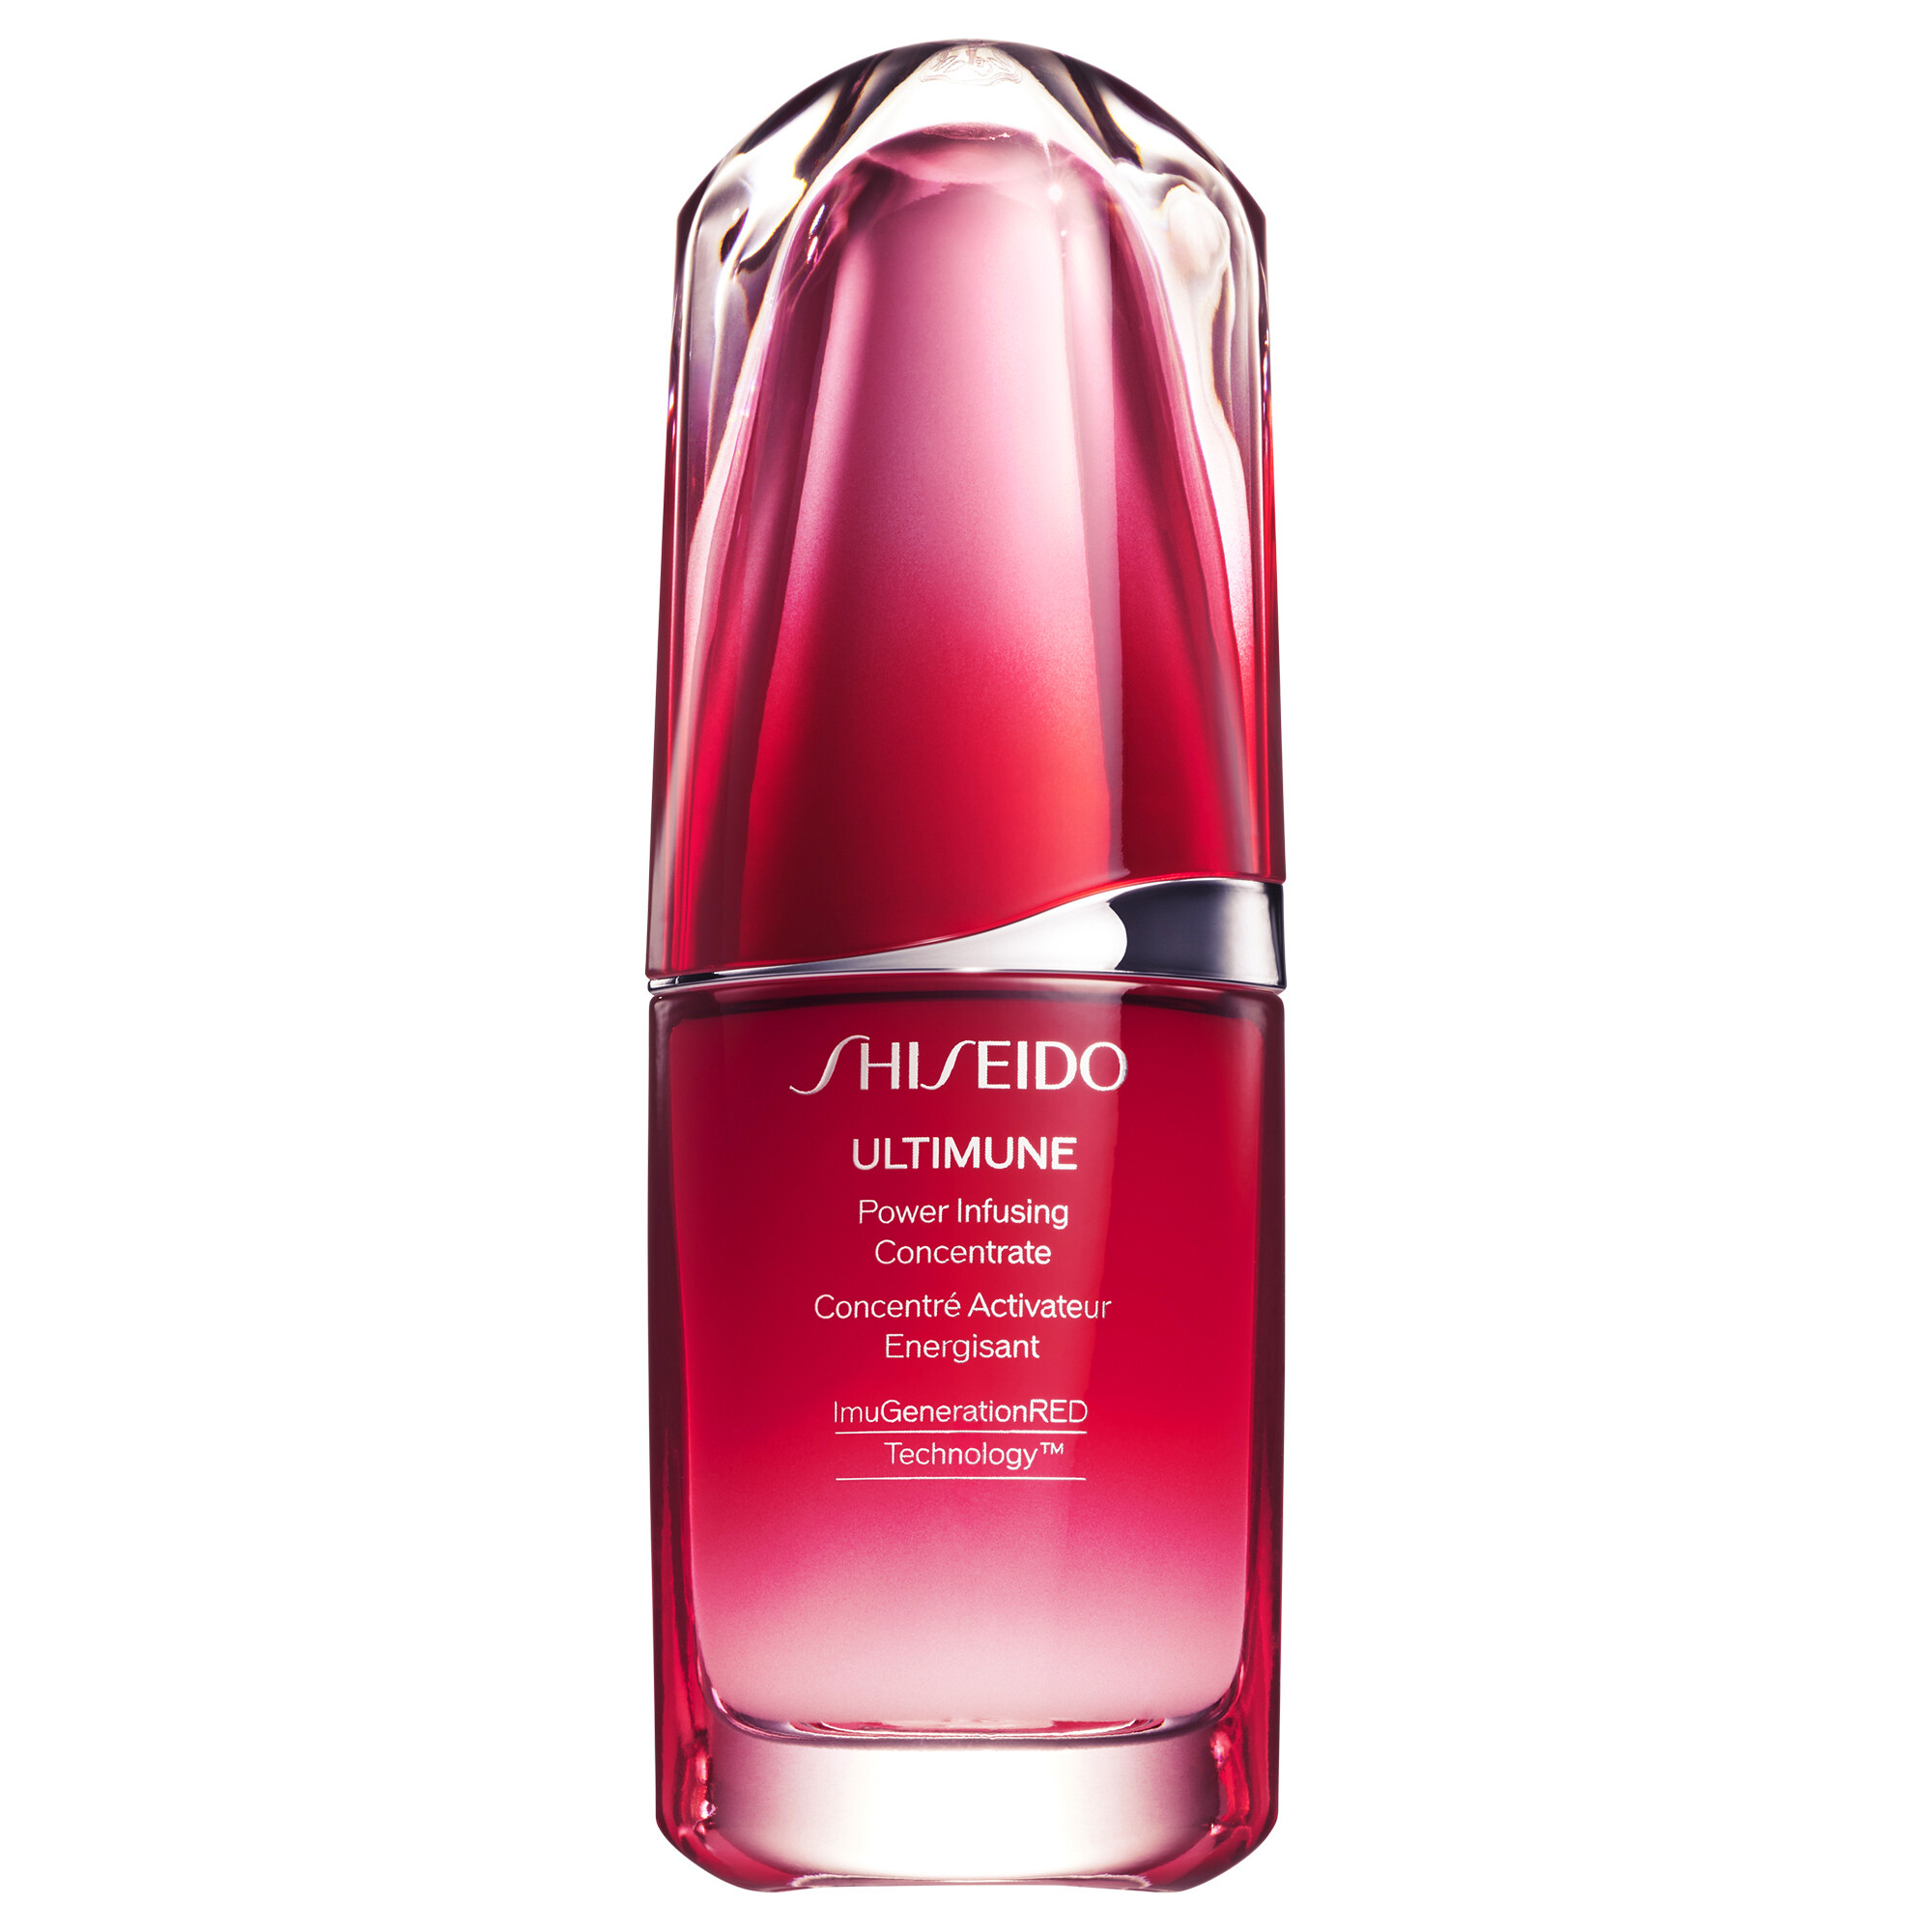 Pflege Shiseido ULTIMUNE Power Infusing Concentrate kaufen